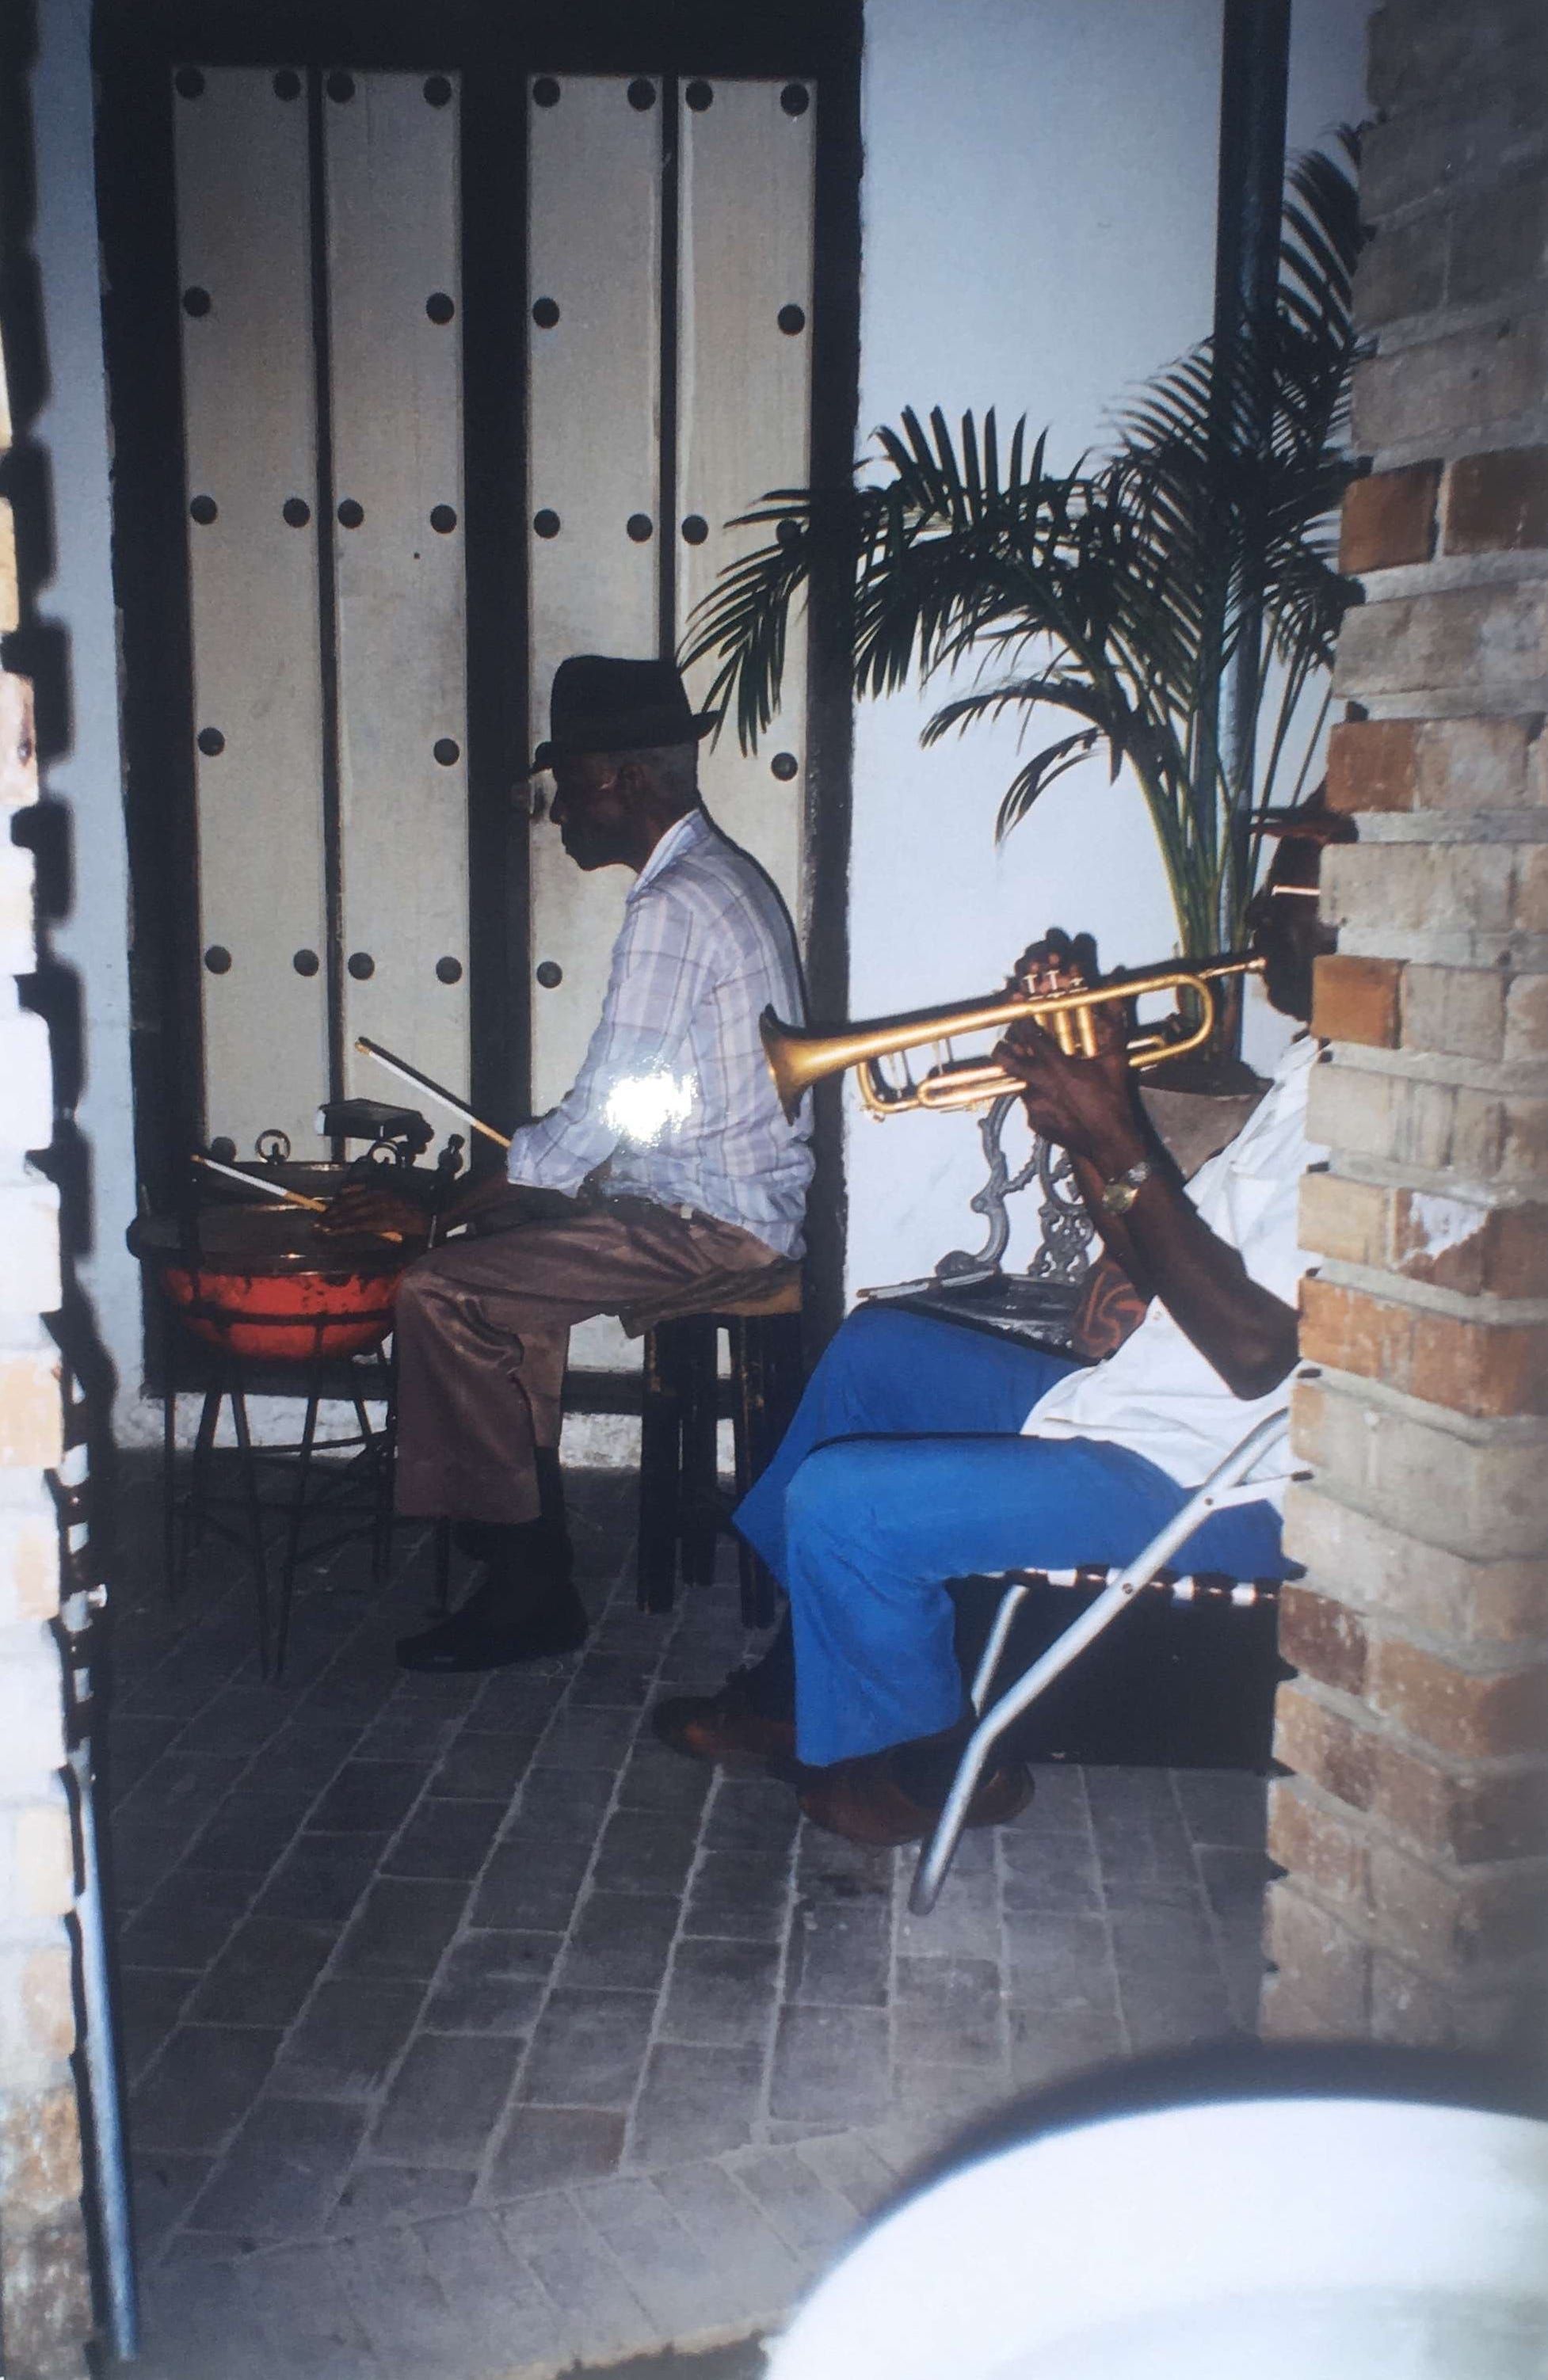 Santiago de Cuba Cuba (Timbales are 1920’s) some of these musicians I met ended up Buena vista social club some years after